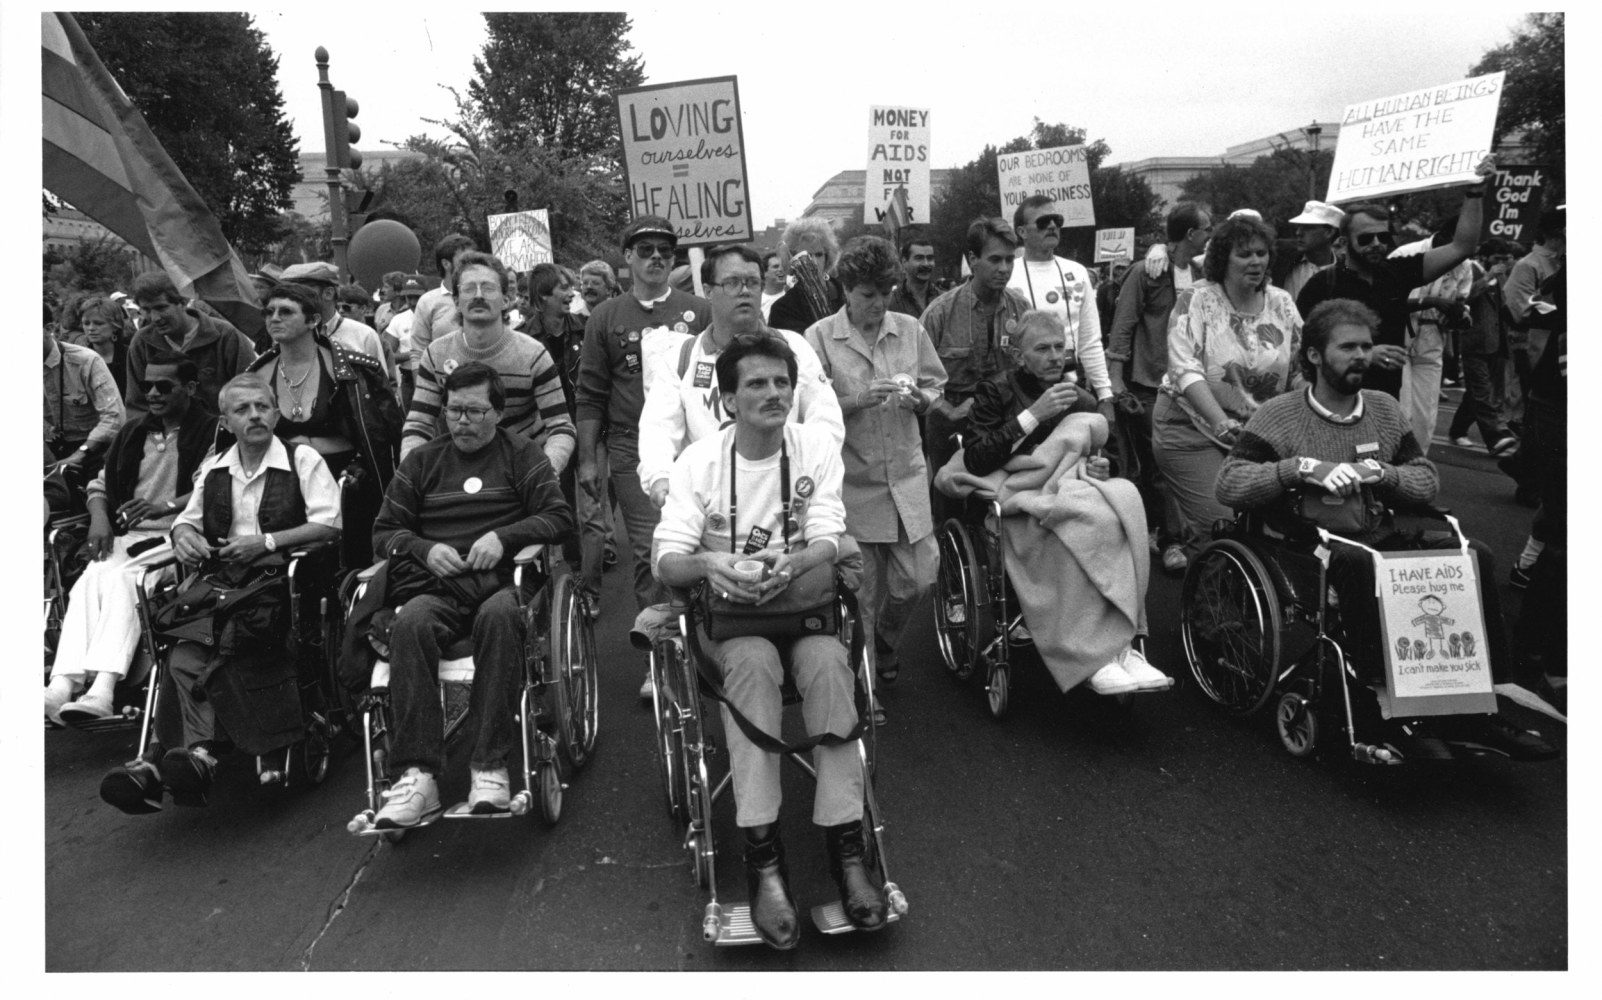 Joan E. Biren
People with AIDS marching on Pennsylvania Avenue in the second national march on Washington for Lesbian and Gay Rights, 1987 - printed 1997
Gelatin silver print
9.75 x 6.5 inches